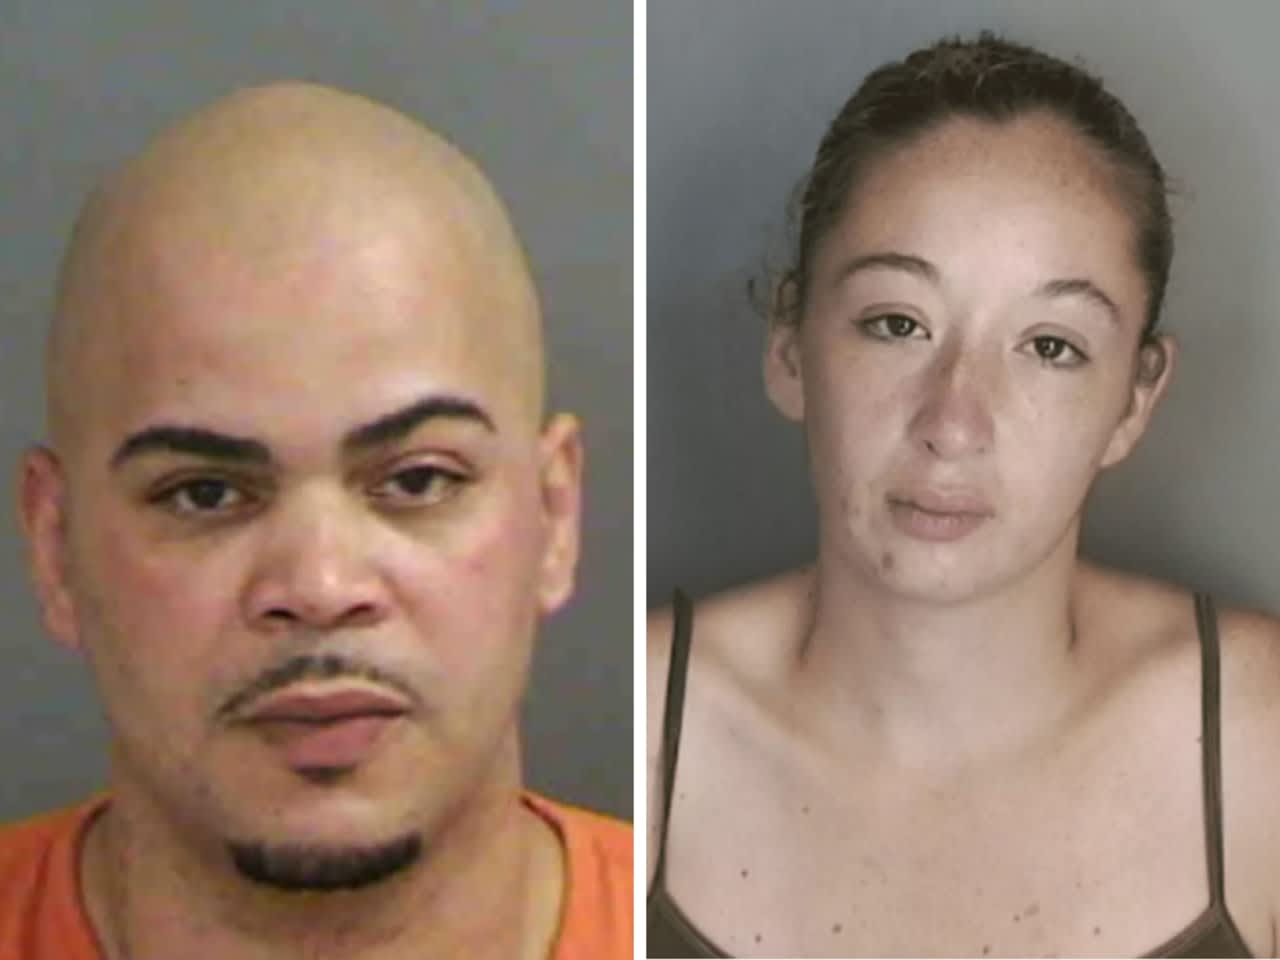 Florida resident Christopher Gonzalez (right) admitted to strangling Yonkers resident Angel Serbay in 2005 and leaving her body on the shoulder of a parkway.